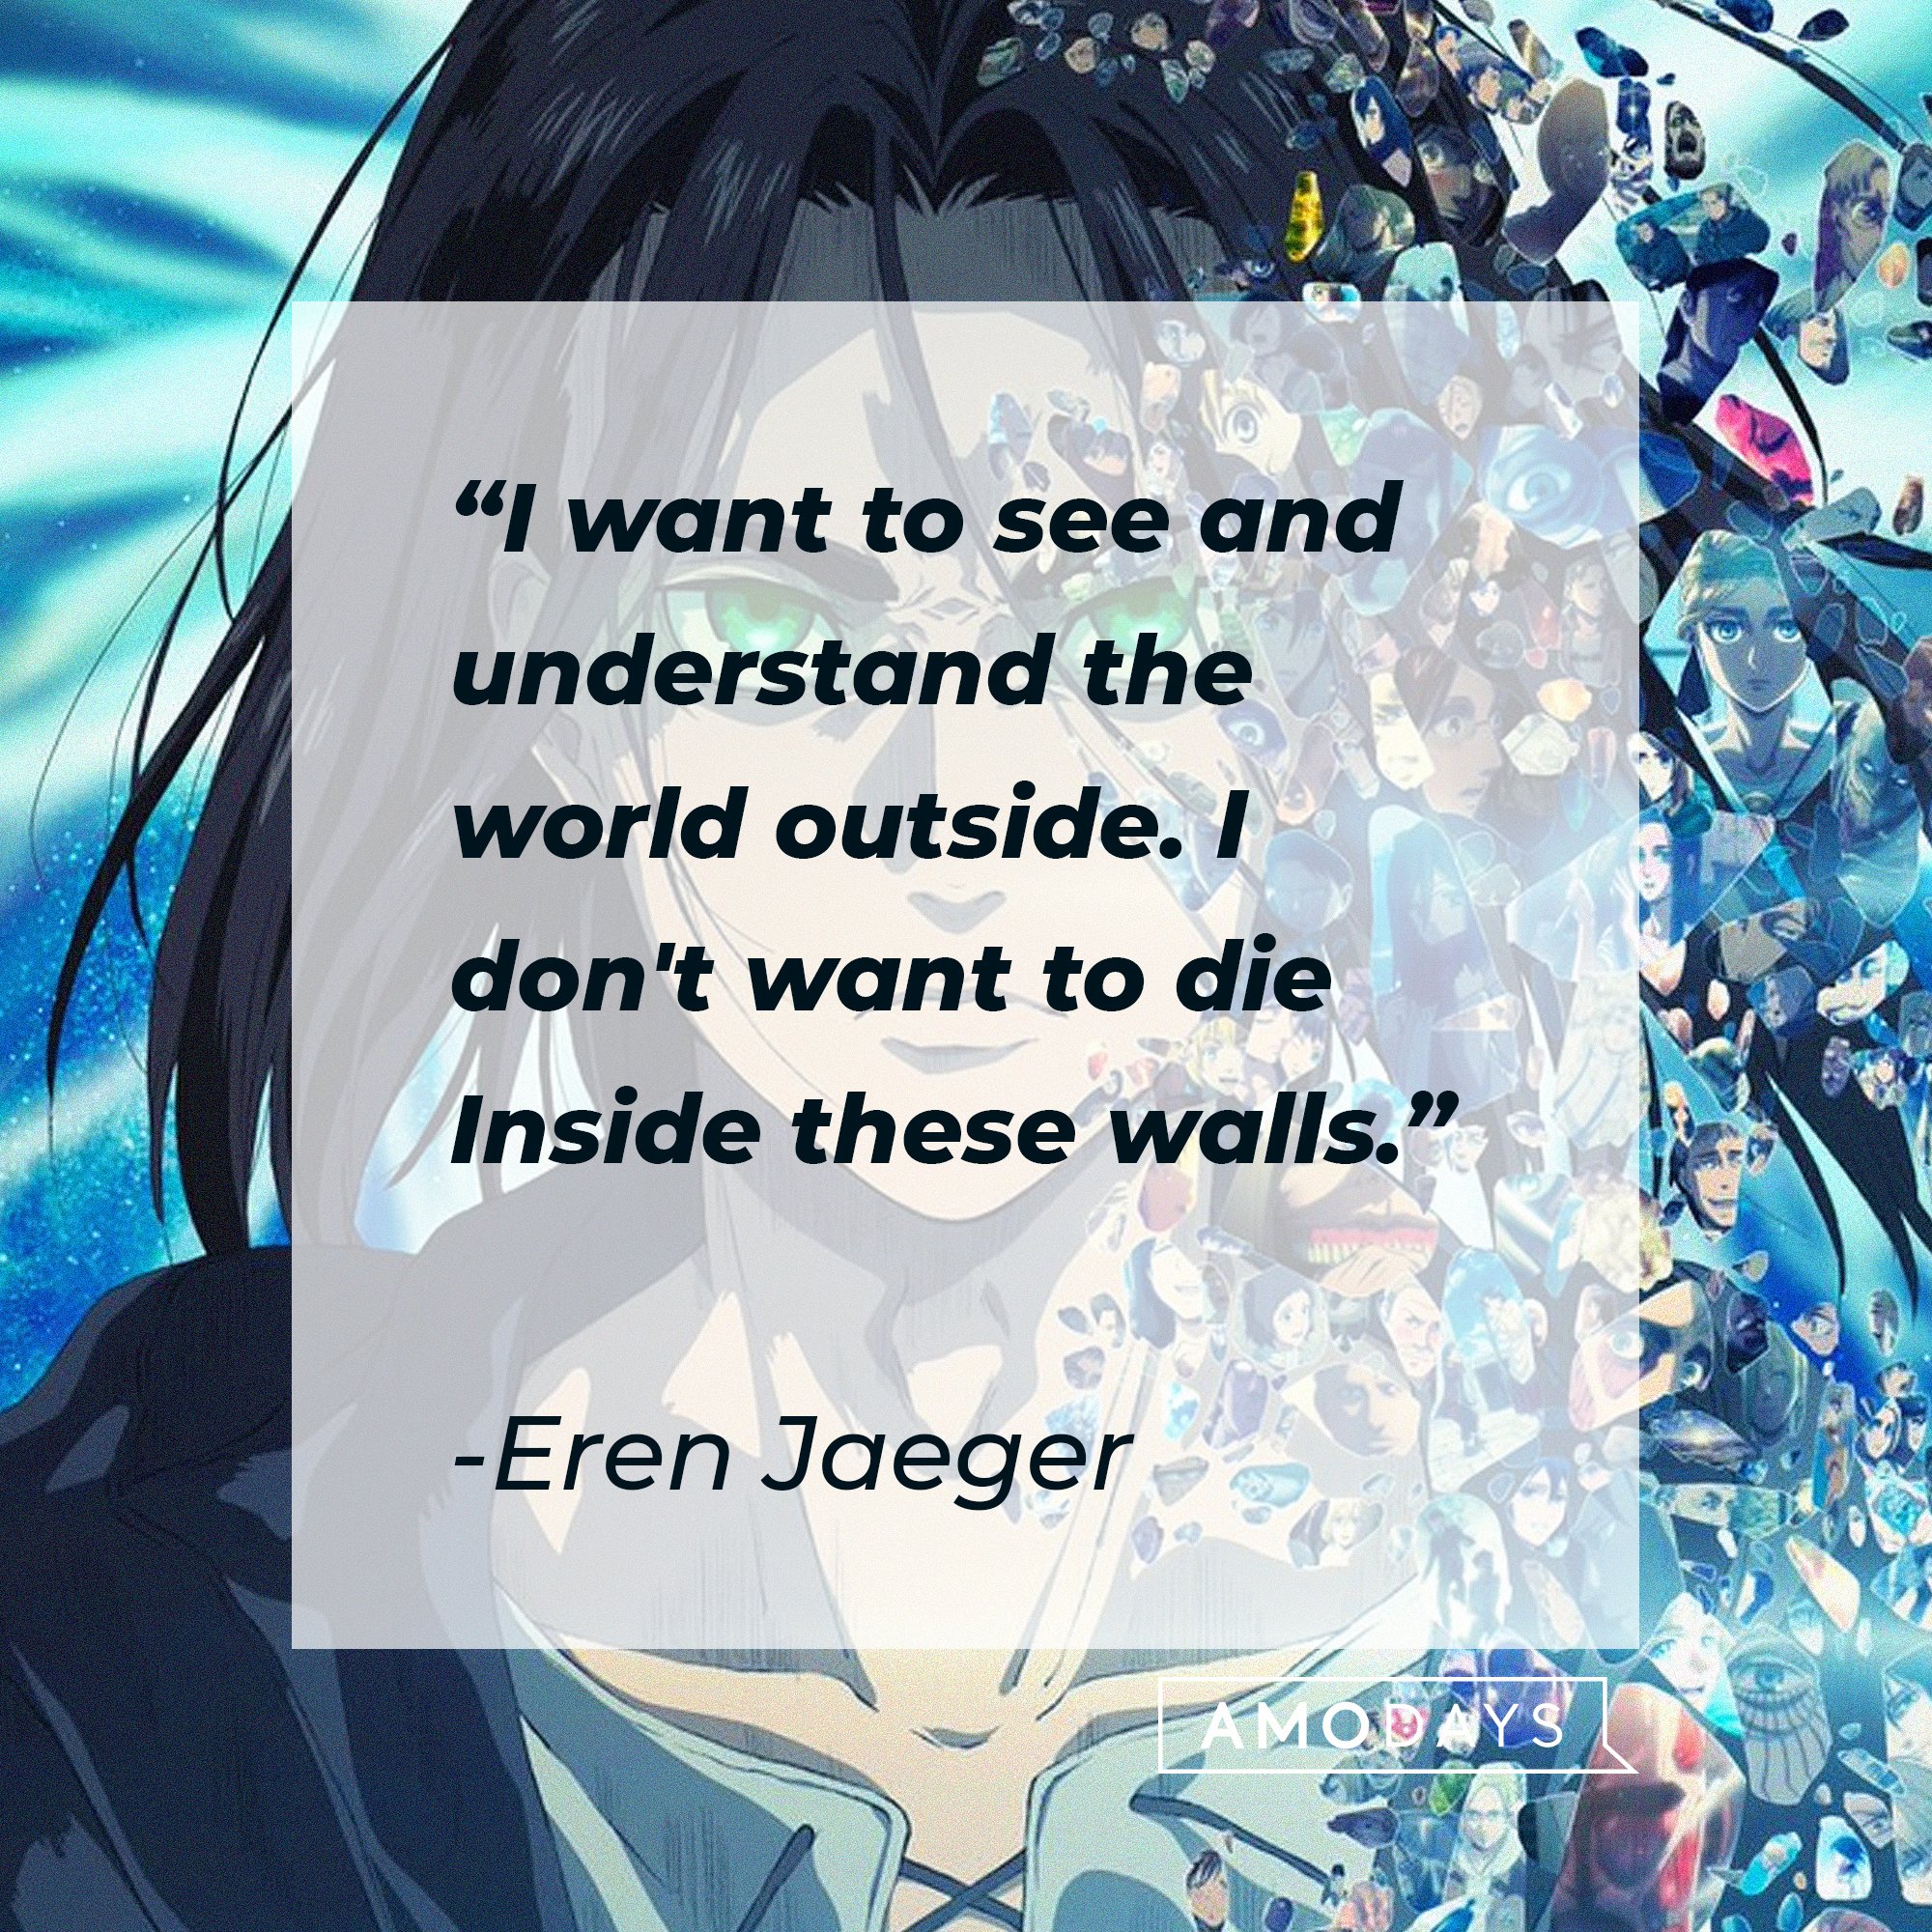 Eren Jaeger’s quote: "I want to see and understand the world outside; I don't want to die inside these walls.” | Image: AmoDays